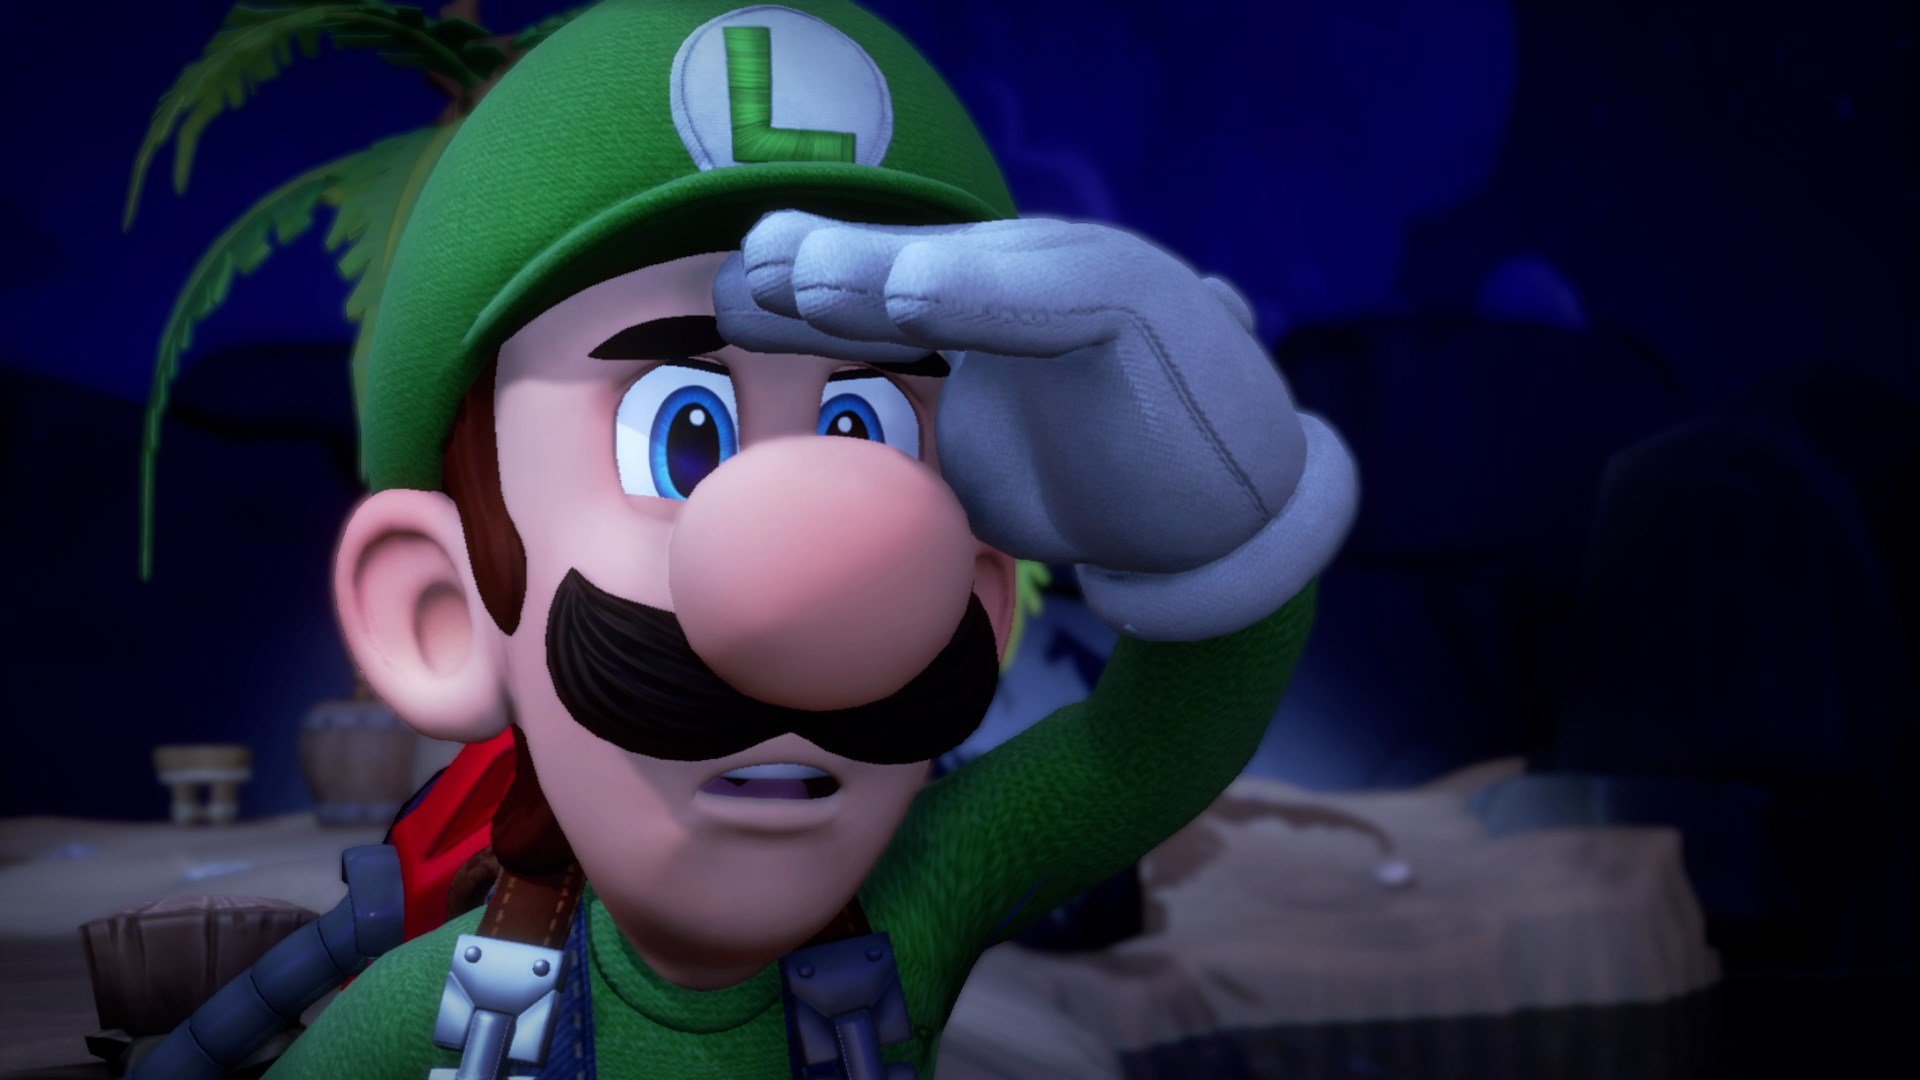 Luigi's Mansion 3 is full of charisma and identity